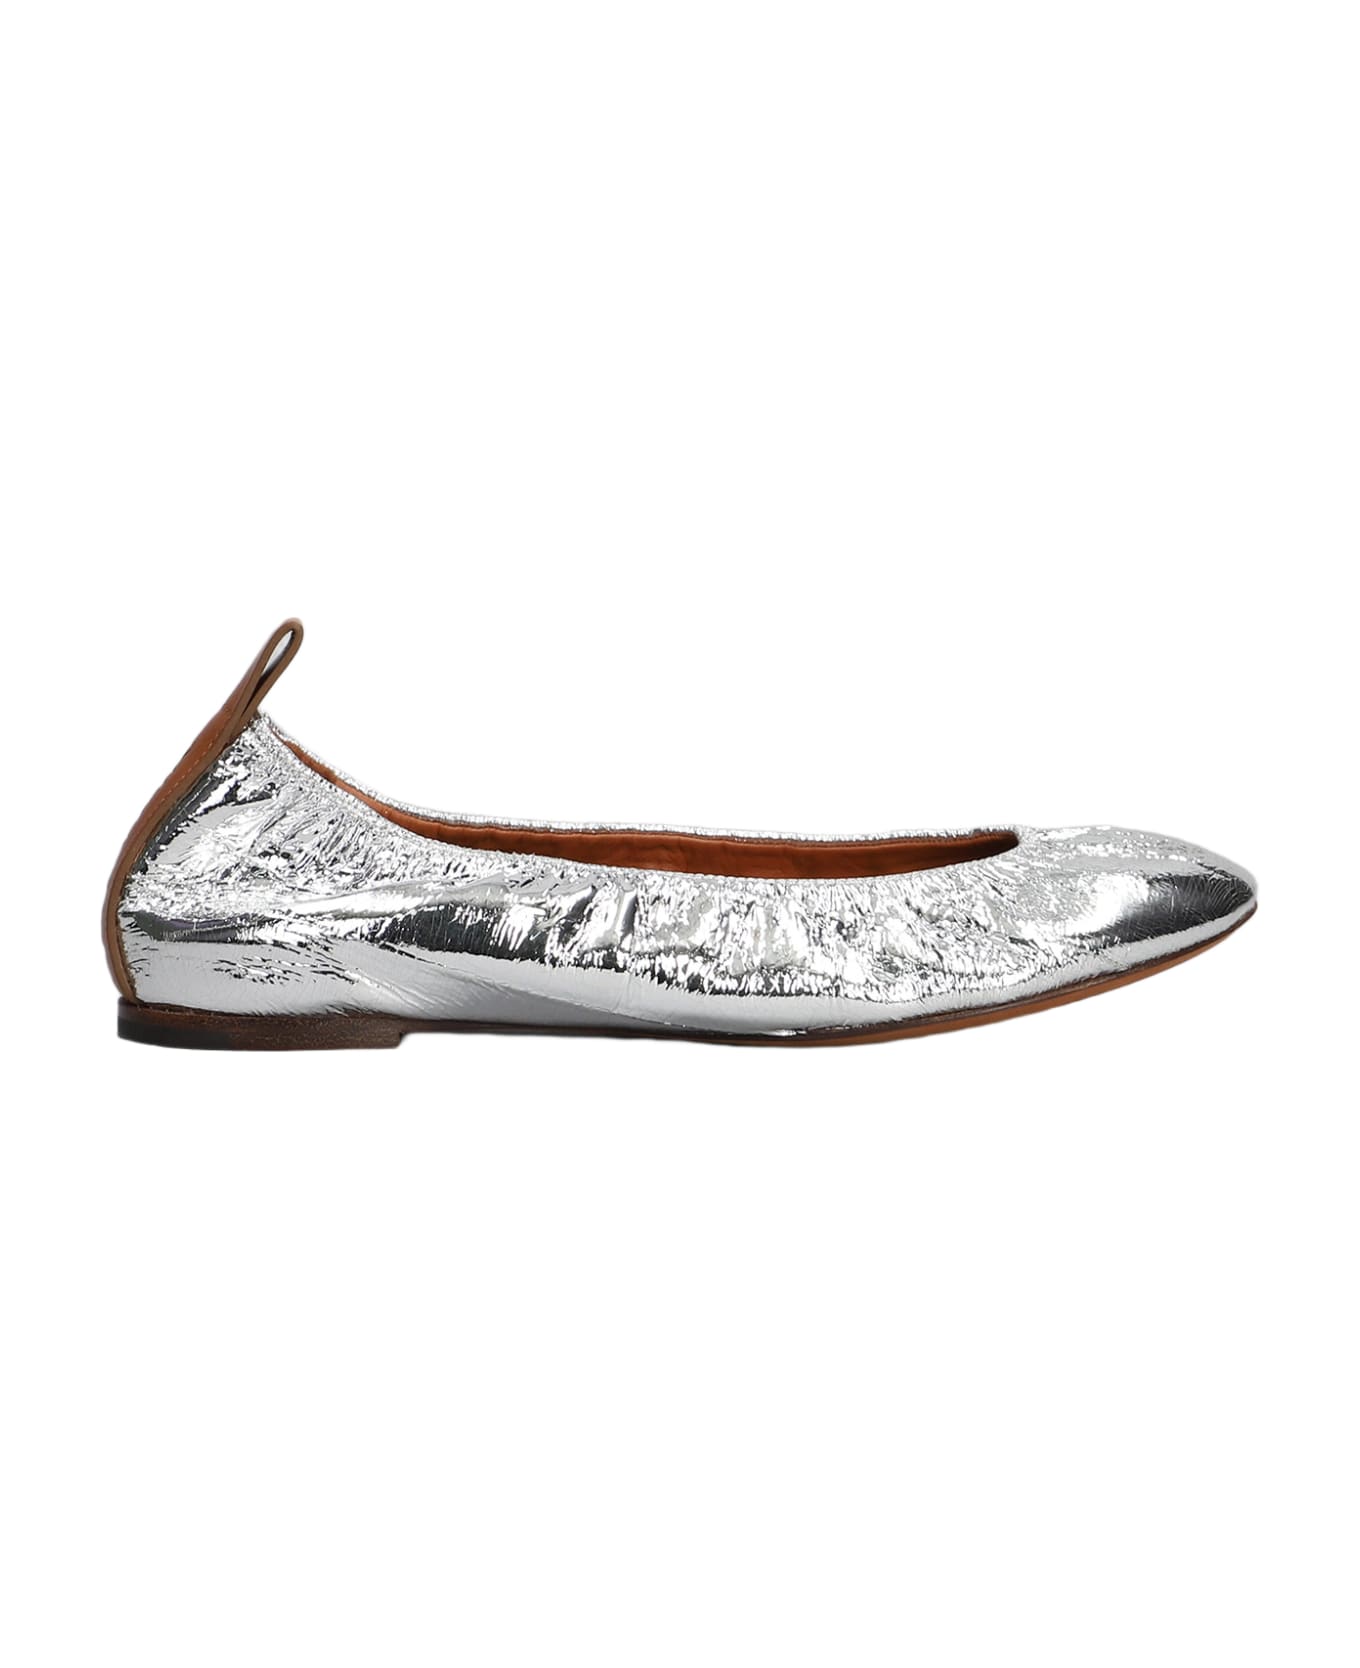 Lanvin Ballet Flats In Silver Leather - silver フラットシューズ